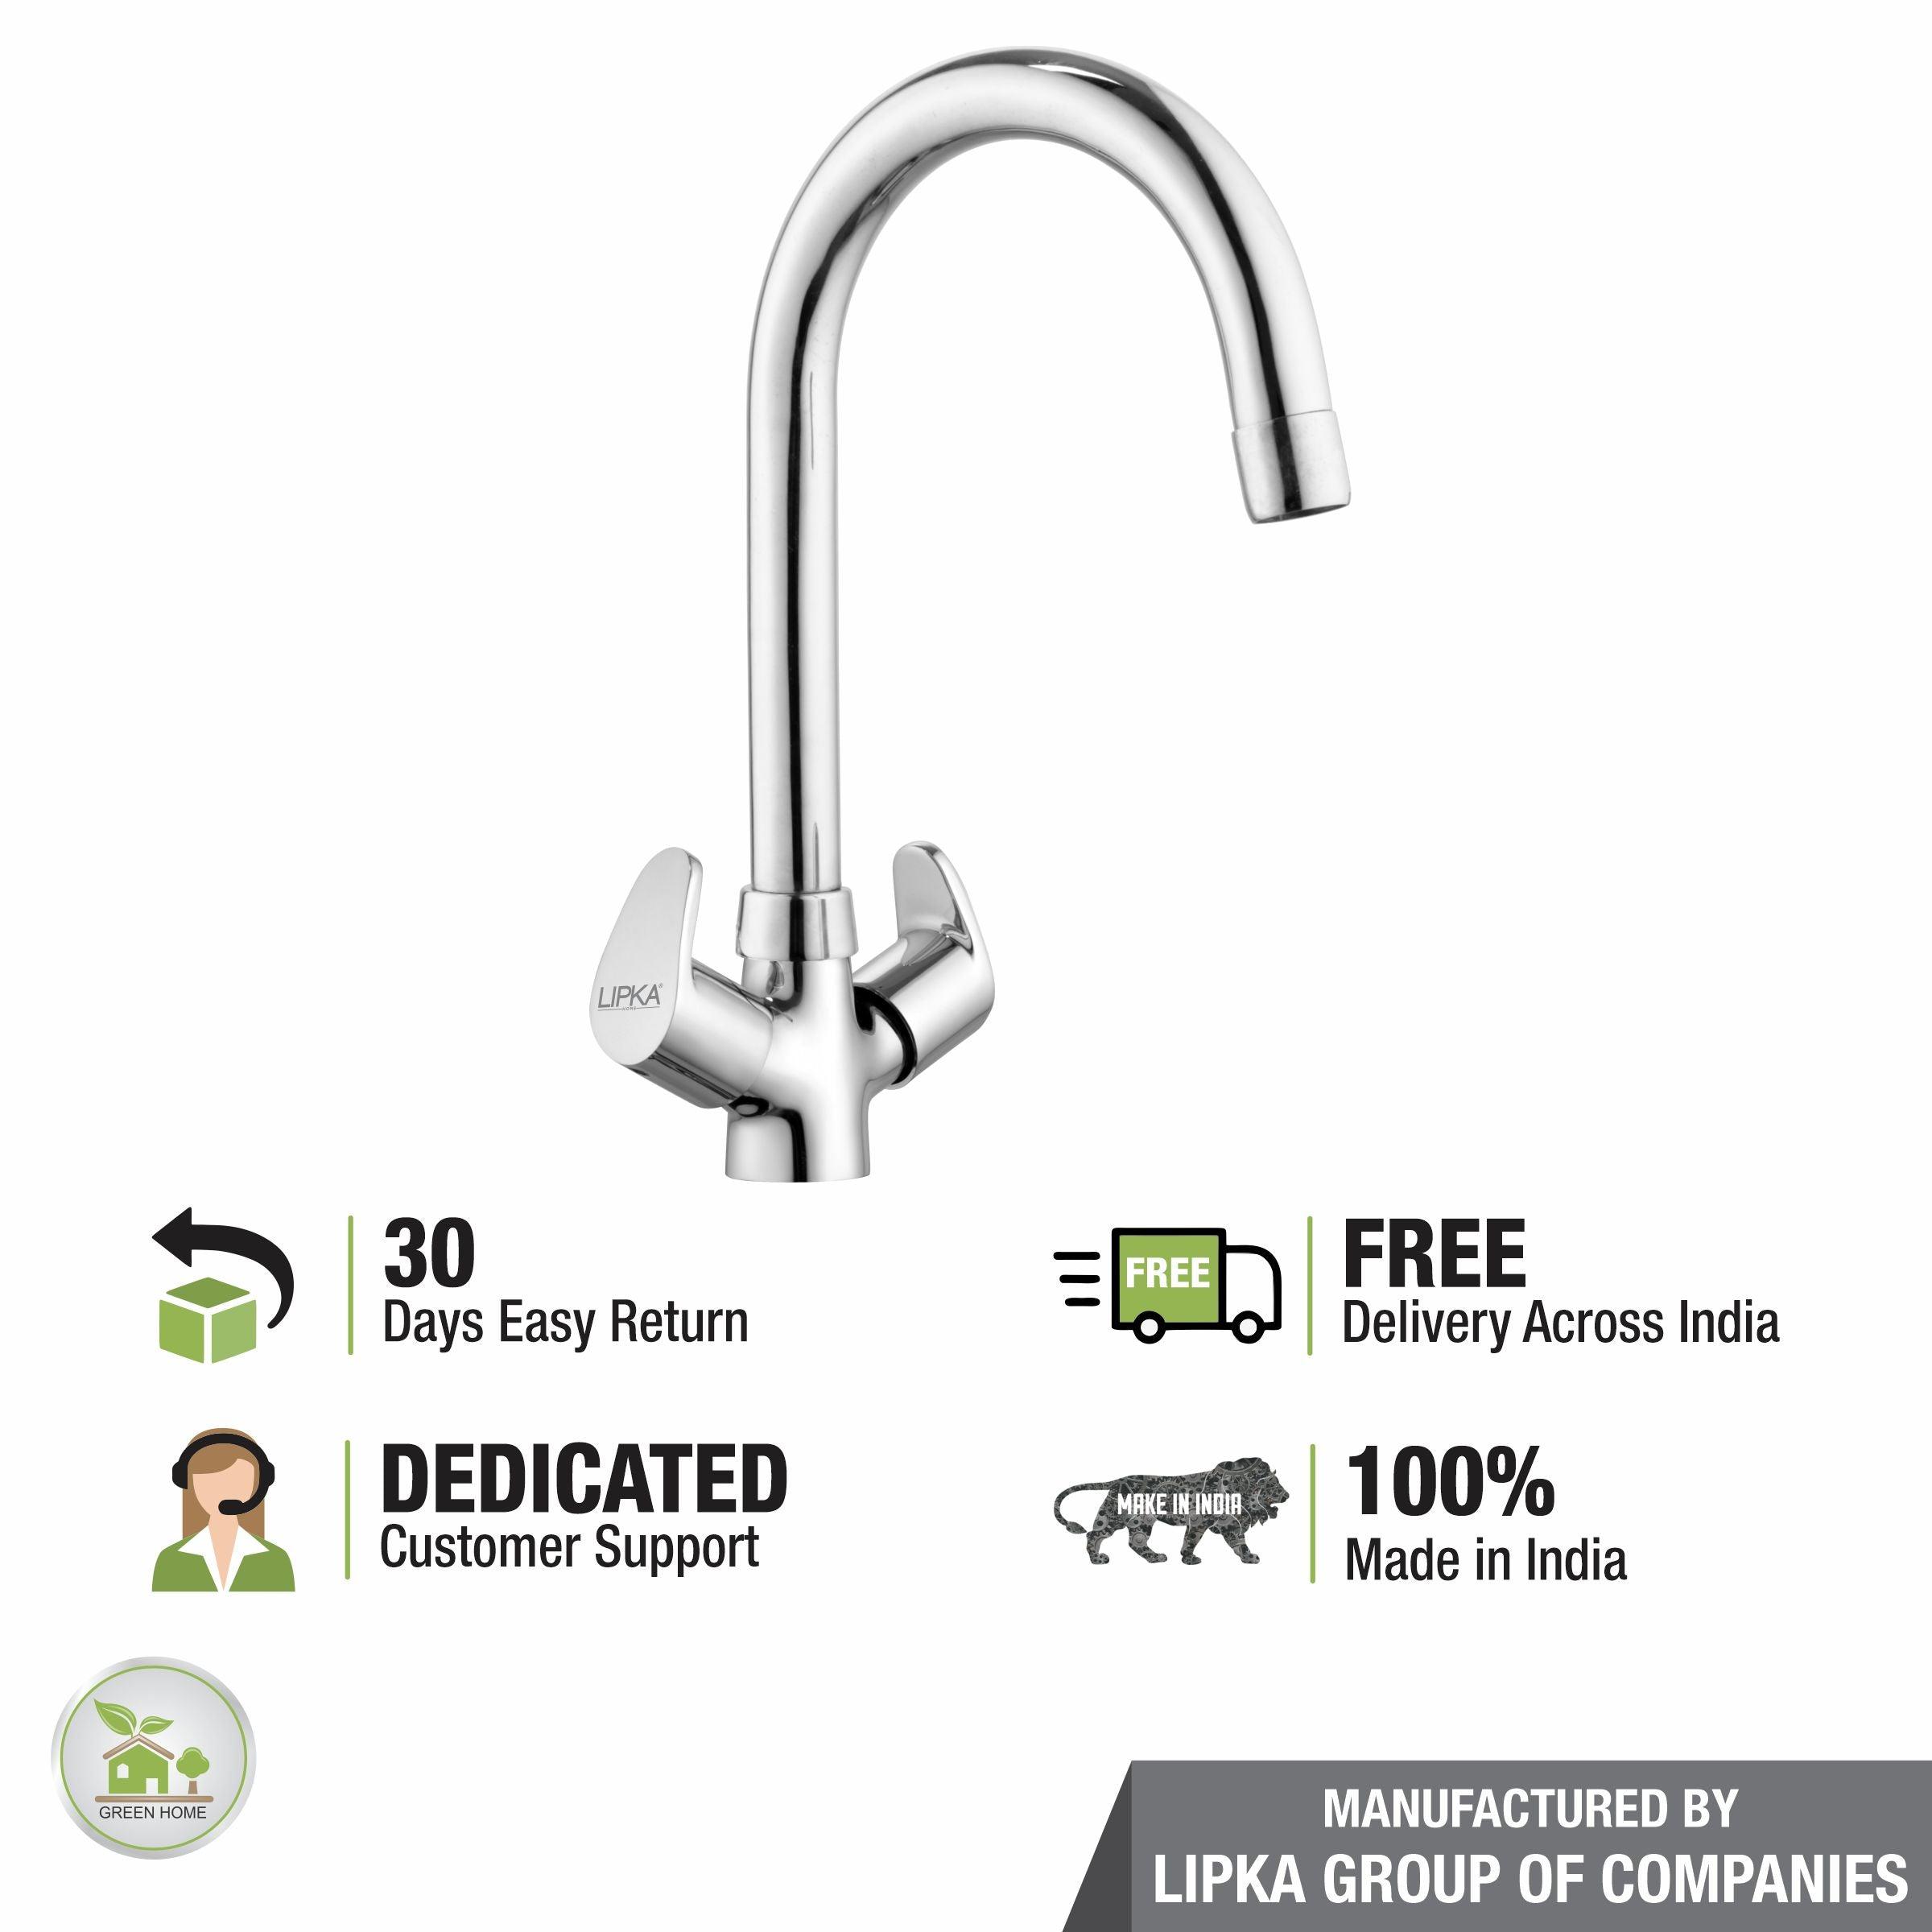 Apple Centre Hole Basin Mixer Brass Faucet with Round Swivel Spout (15 Inches) - LIPKA - Lipka Home